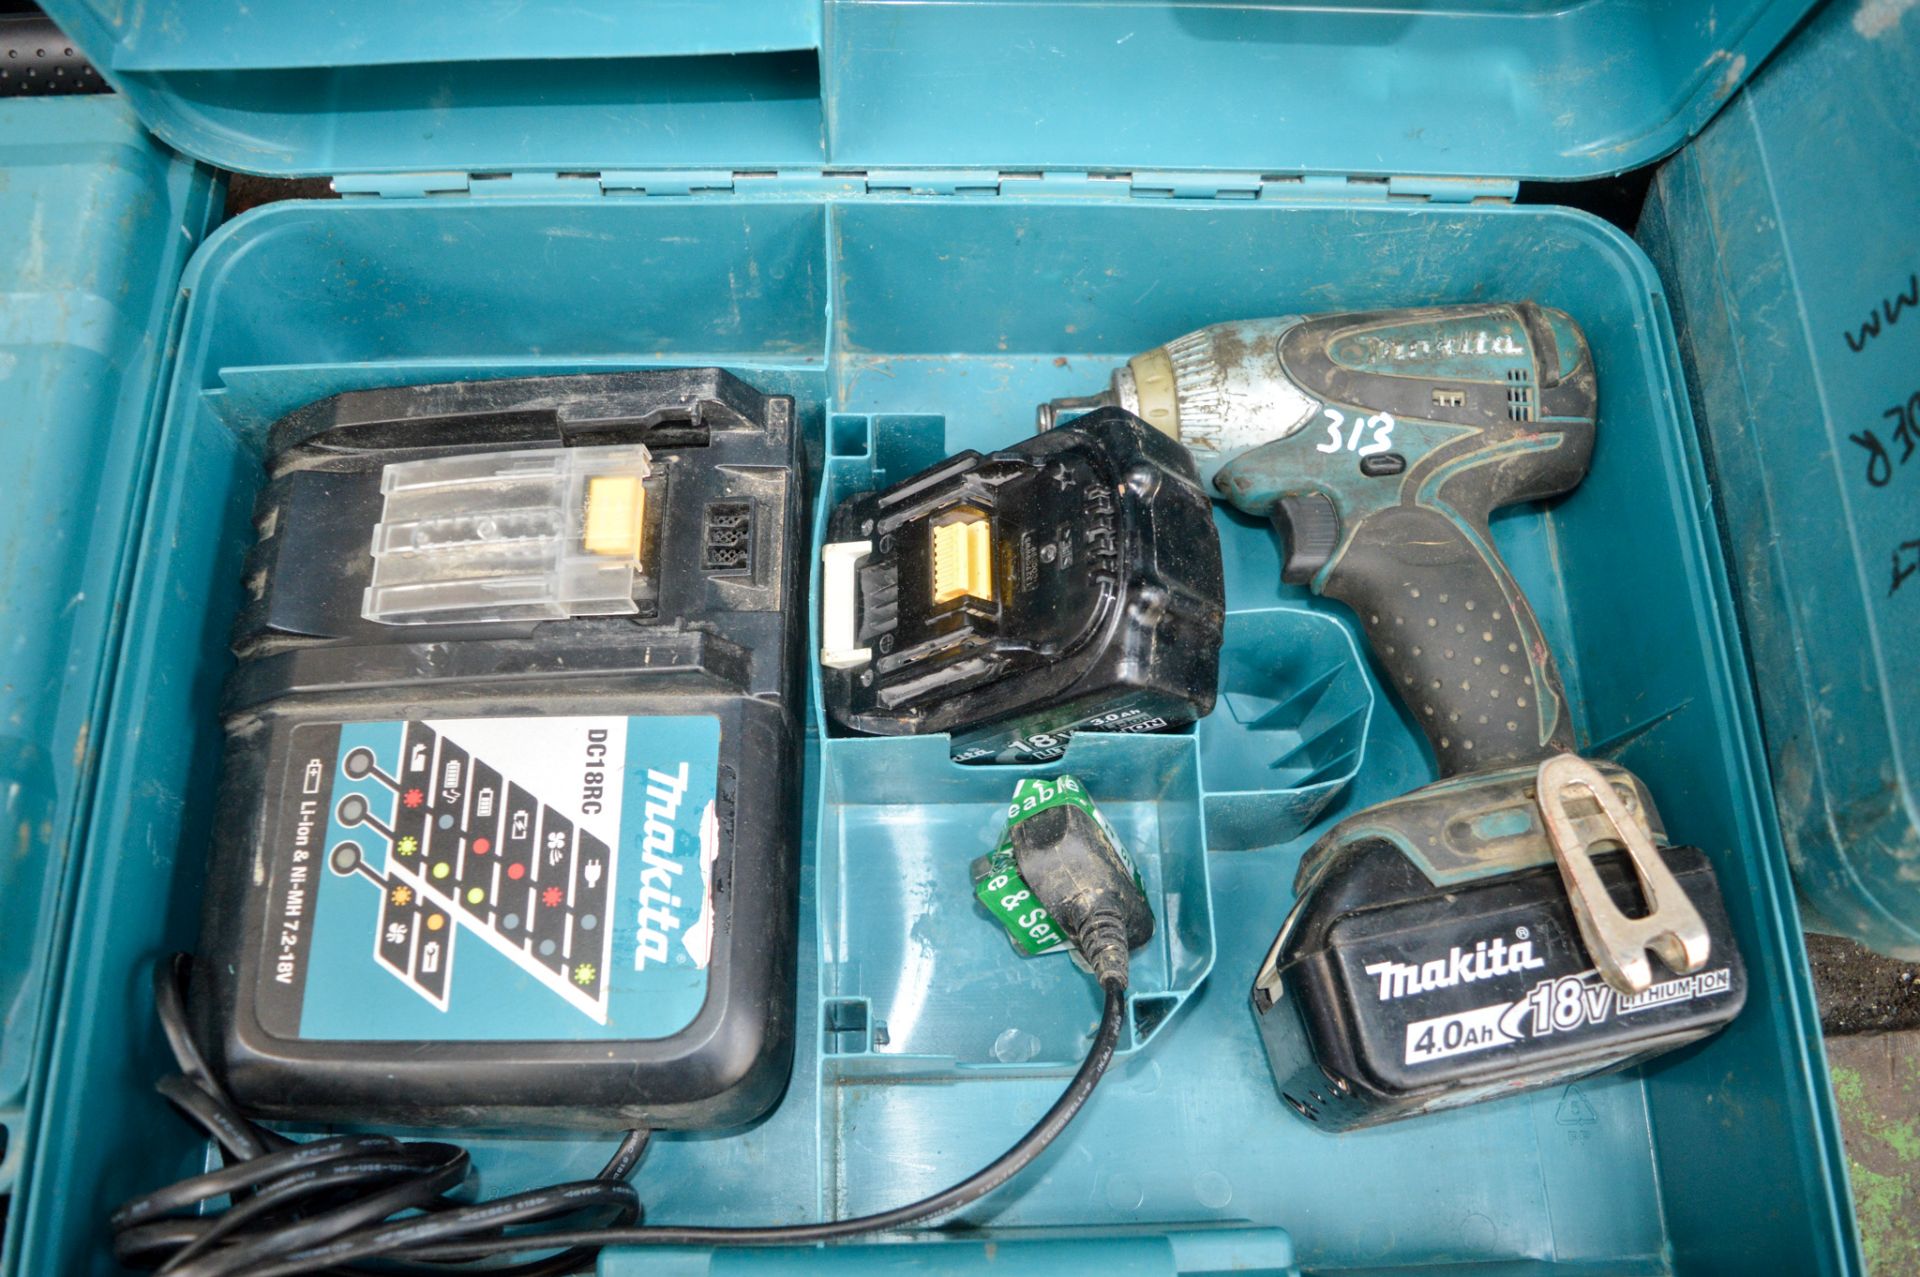 Makita 18v cordless 1/2 inch impact gun c/w 2 batteries, charger & carry case A665930